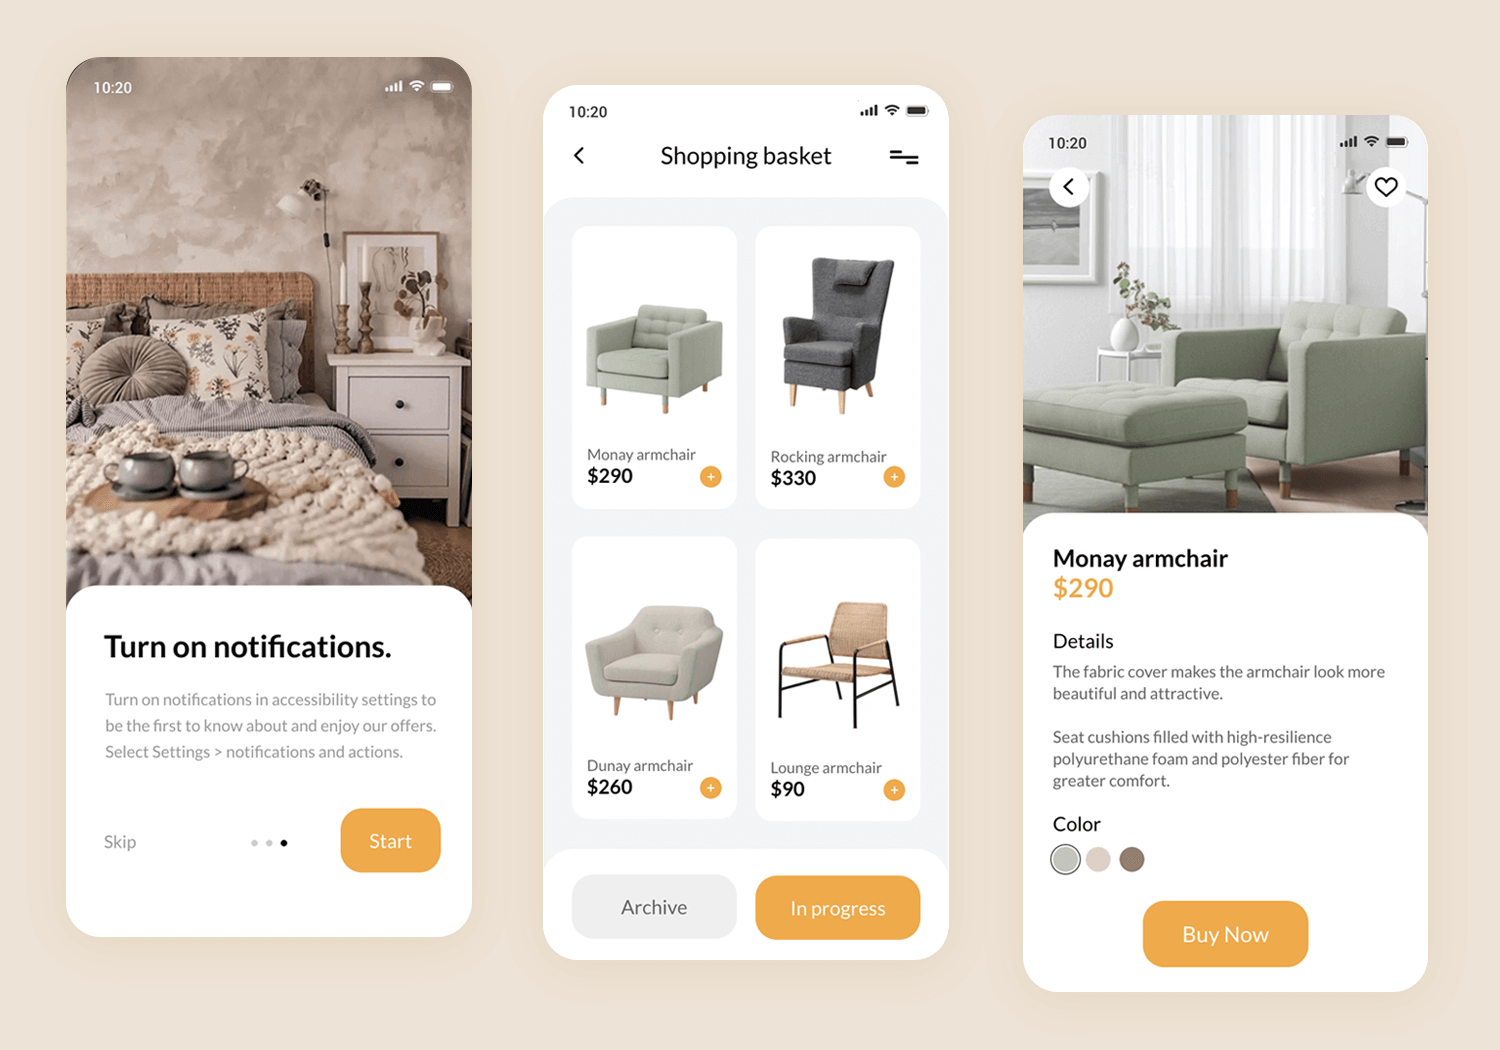 mobile app mockup example for online store